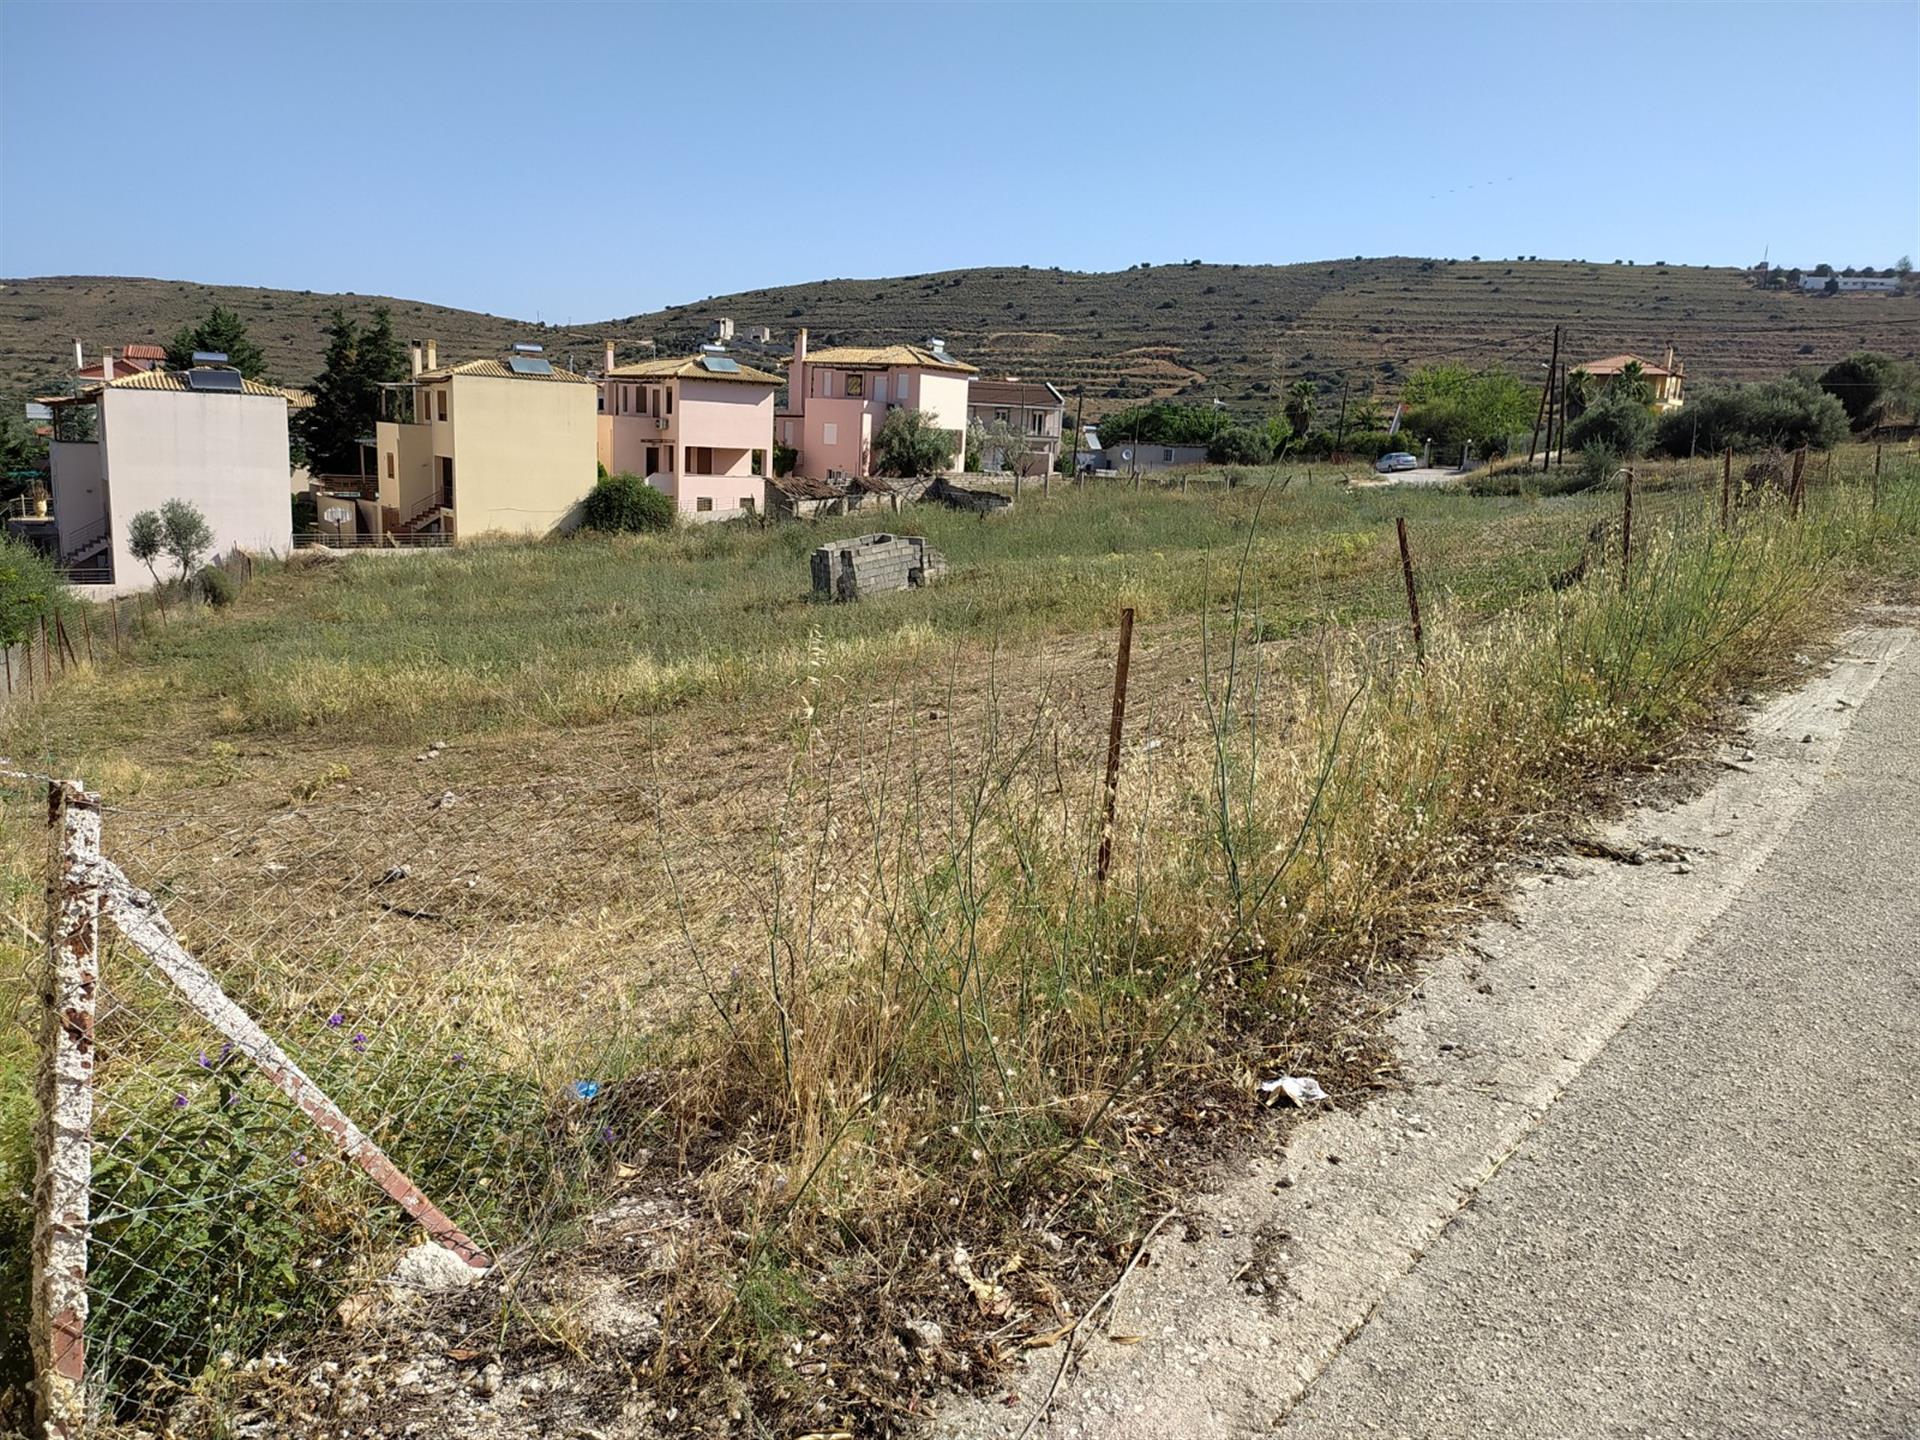 Plot of land for sale 714m2, in the center of Lefkakia village